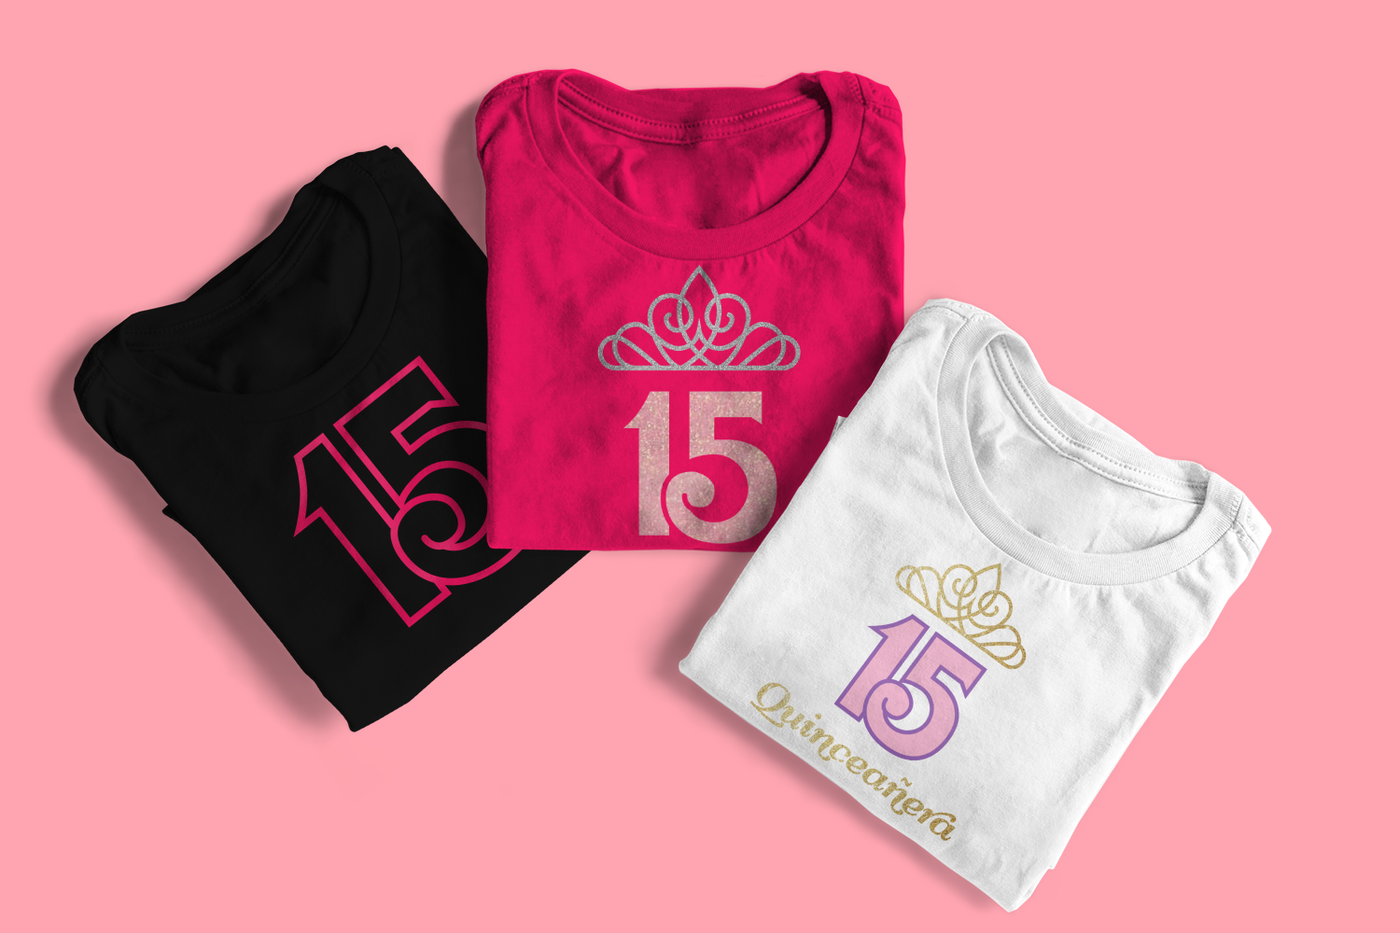 Three folded tees on a pink background. Left tee has a large number 15, middle tee has a large 15 with a tiara, and right tee has a 15 with a tiara and the word "Quinceañera" below.